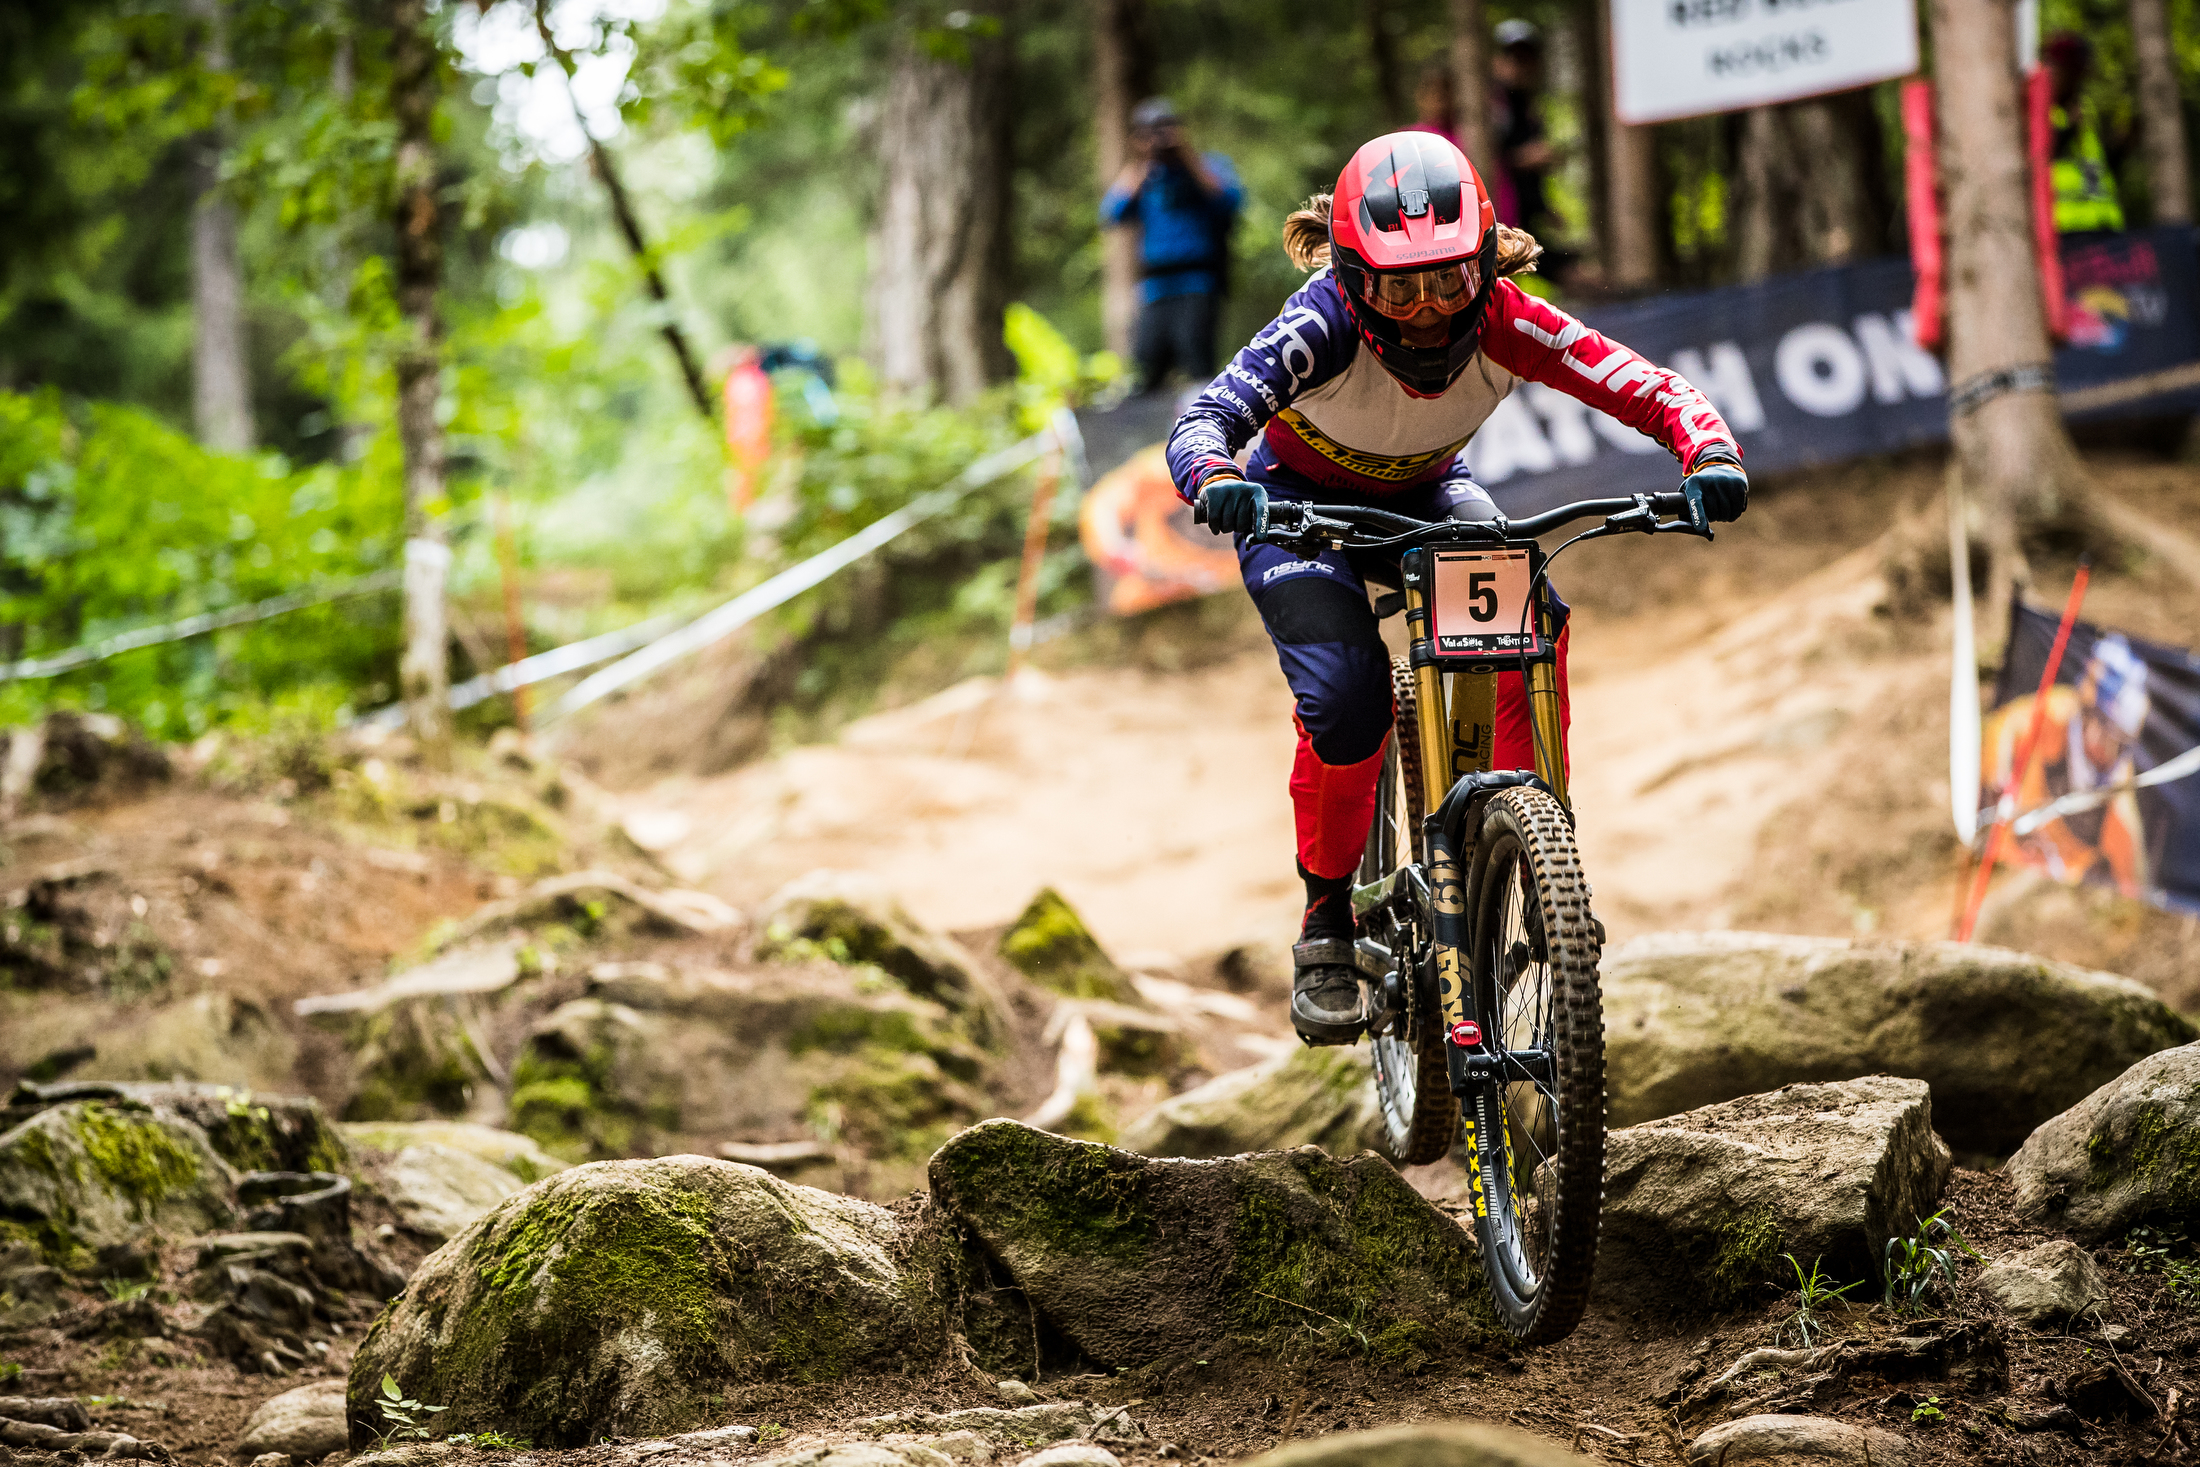 Cabirou Wins by 11 Seconds at World Cup Val di Sole DH